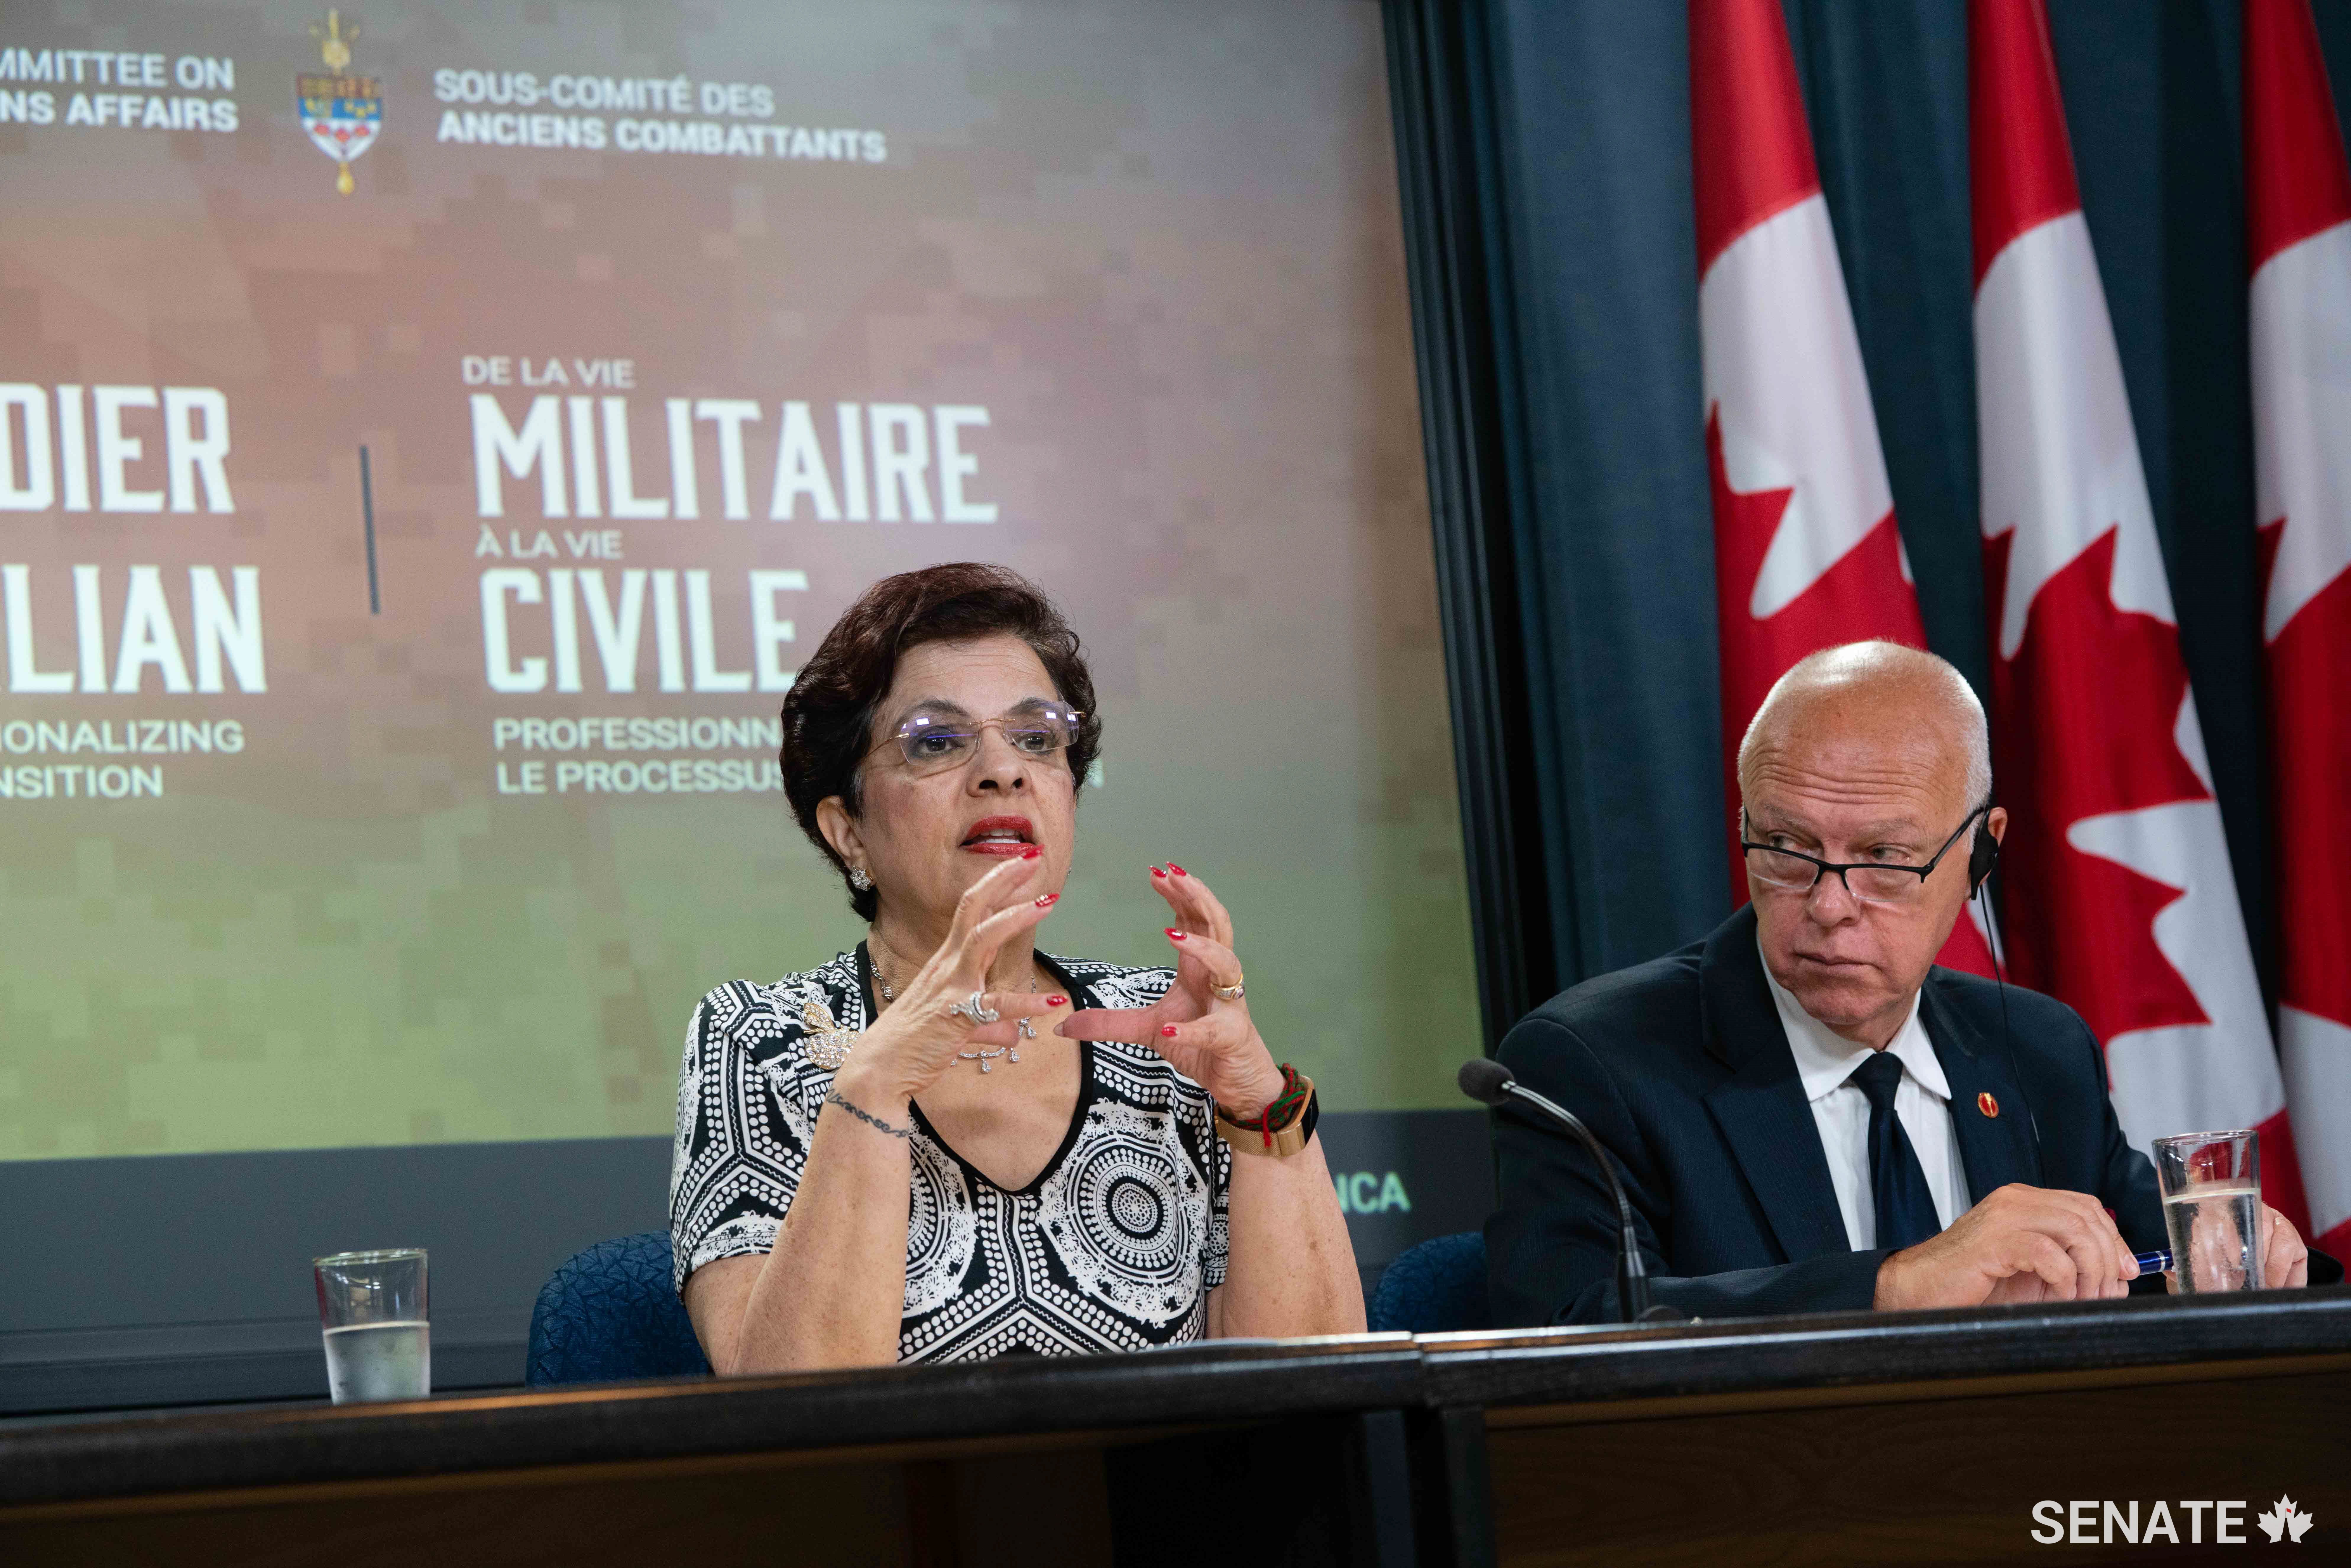 Senator Jaffer, next to Senator Dagenais, presents the committee’s key recommendations at the National Press Theatre during a live announcement.